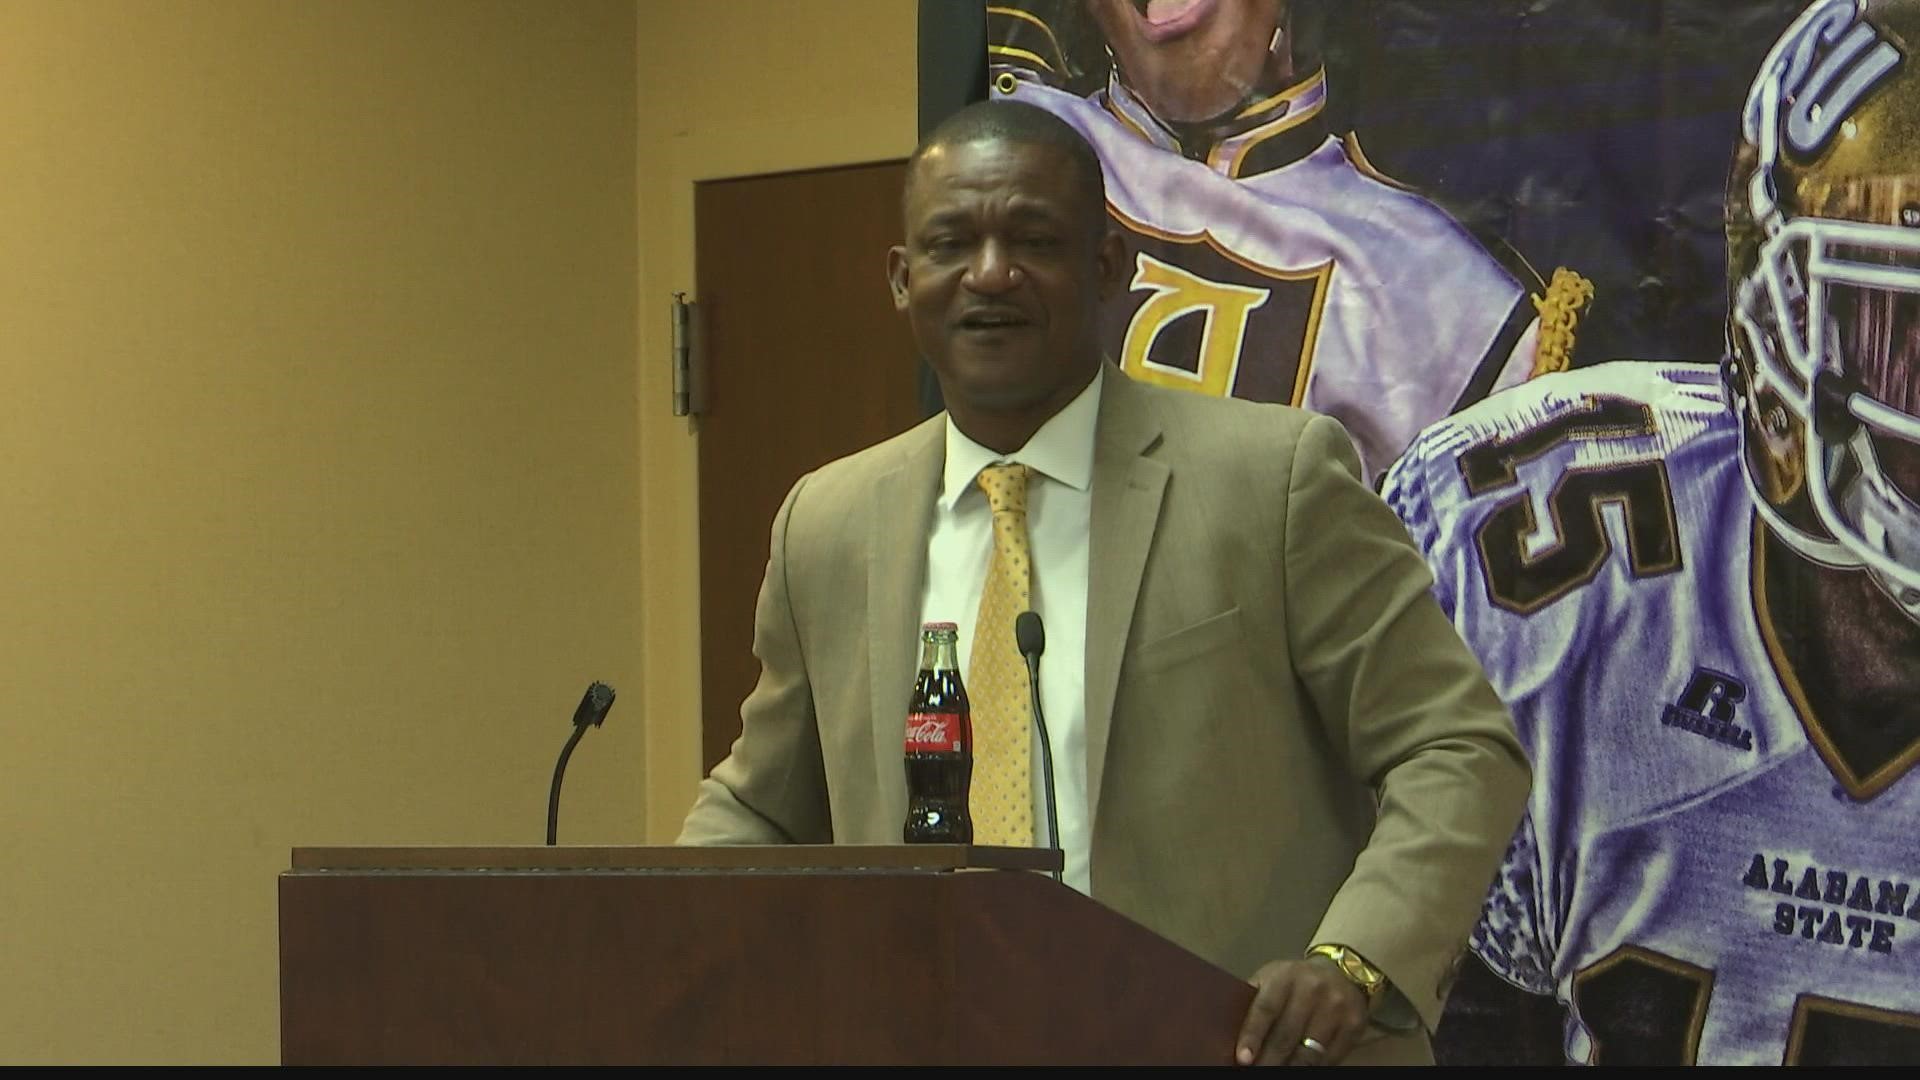 Alabama State has announced a change in leadership for the football program, as Donald Hill-Eley will no longer serve as the head coach.